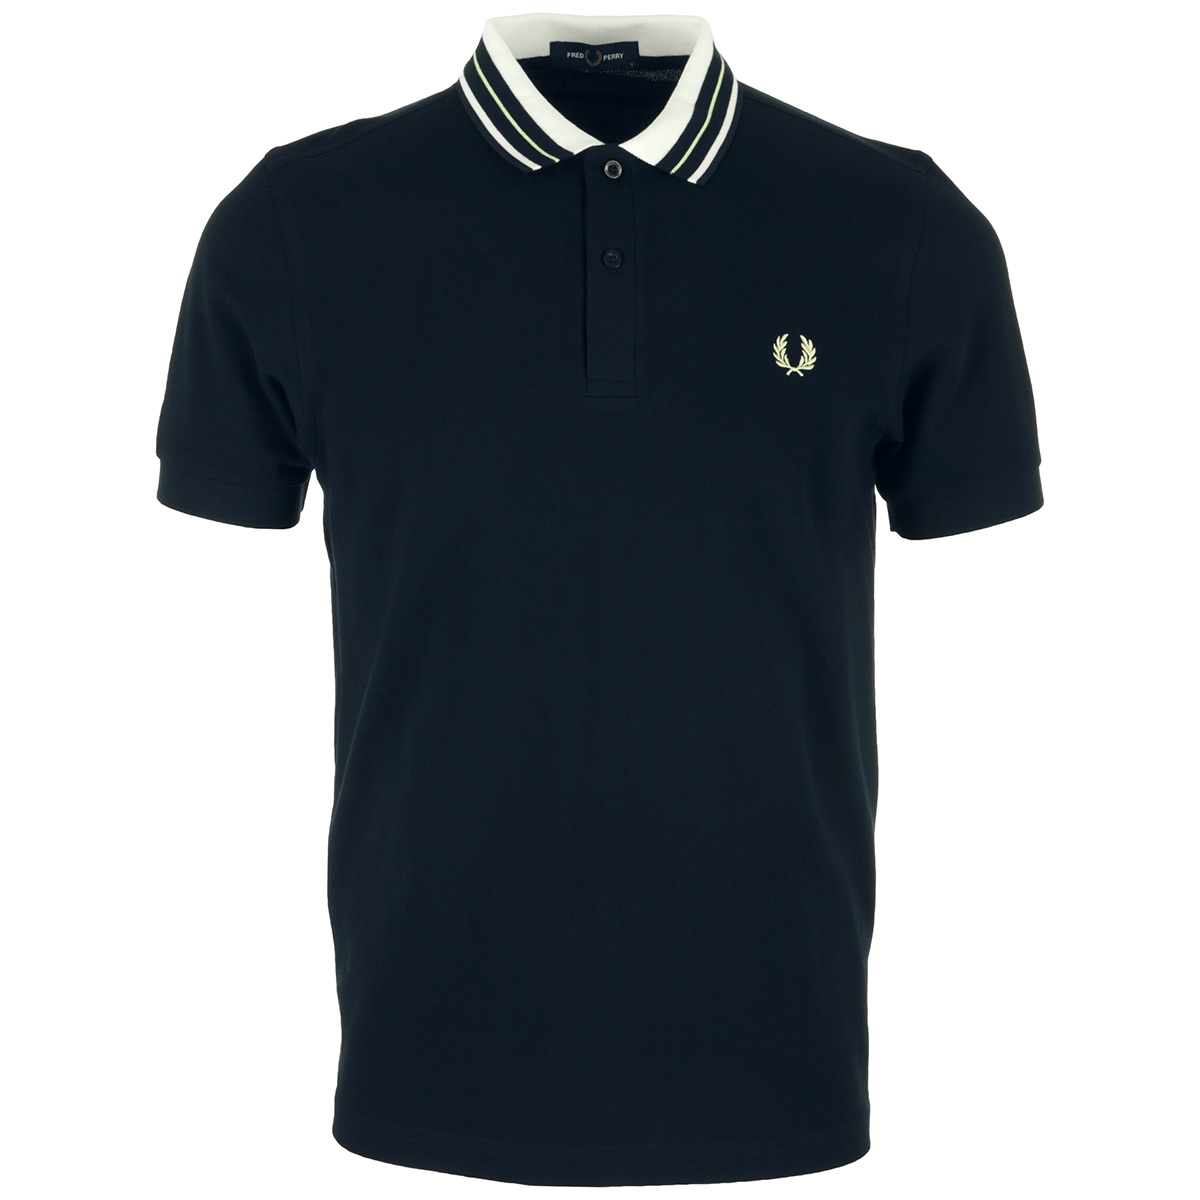 Fred Perry "Tramline Tipped Polo Shirt"